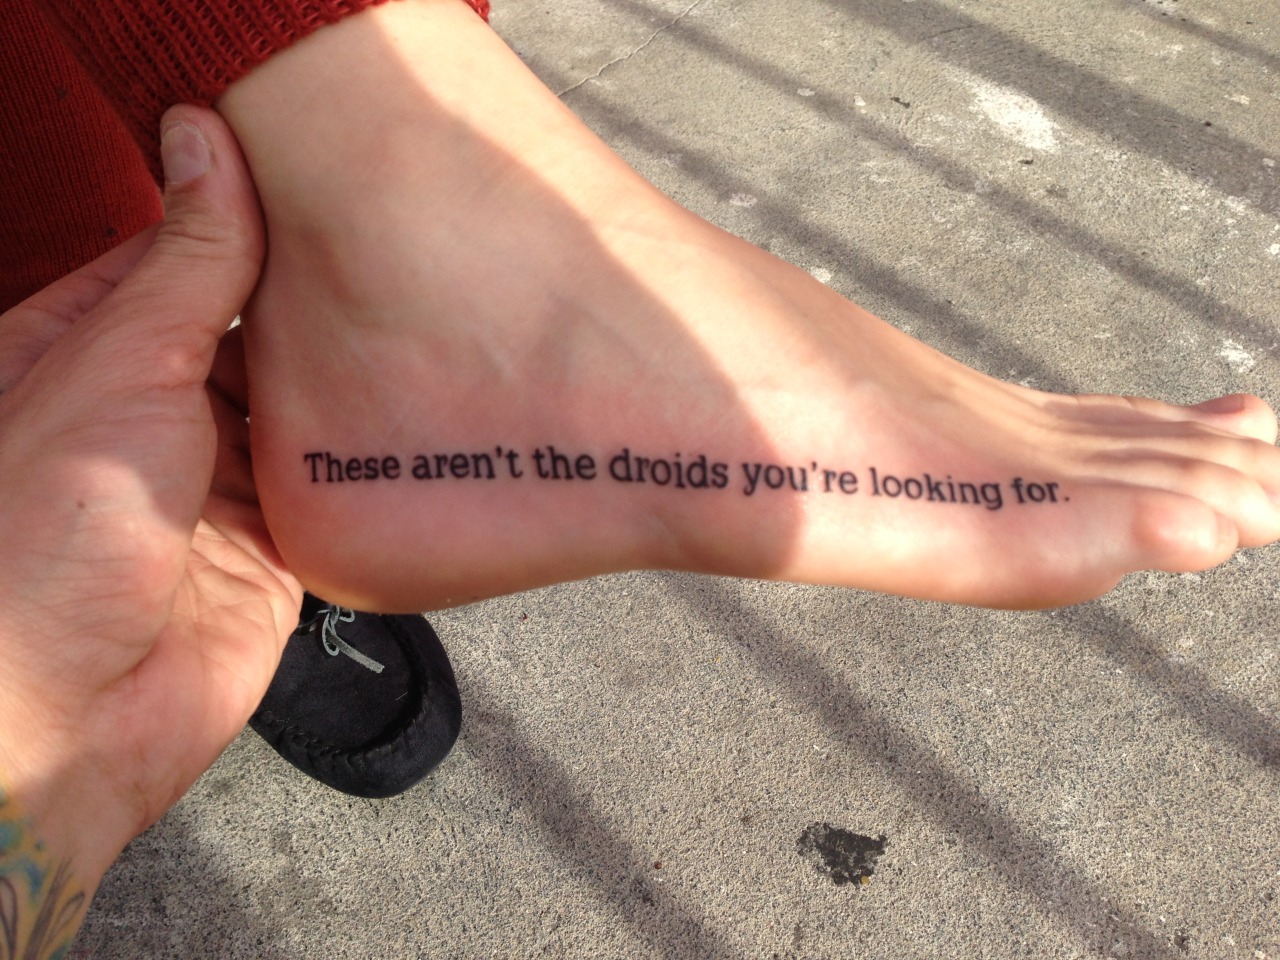 31 Ideas for a Broken Heart Tattoo to Mend Your Soul